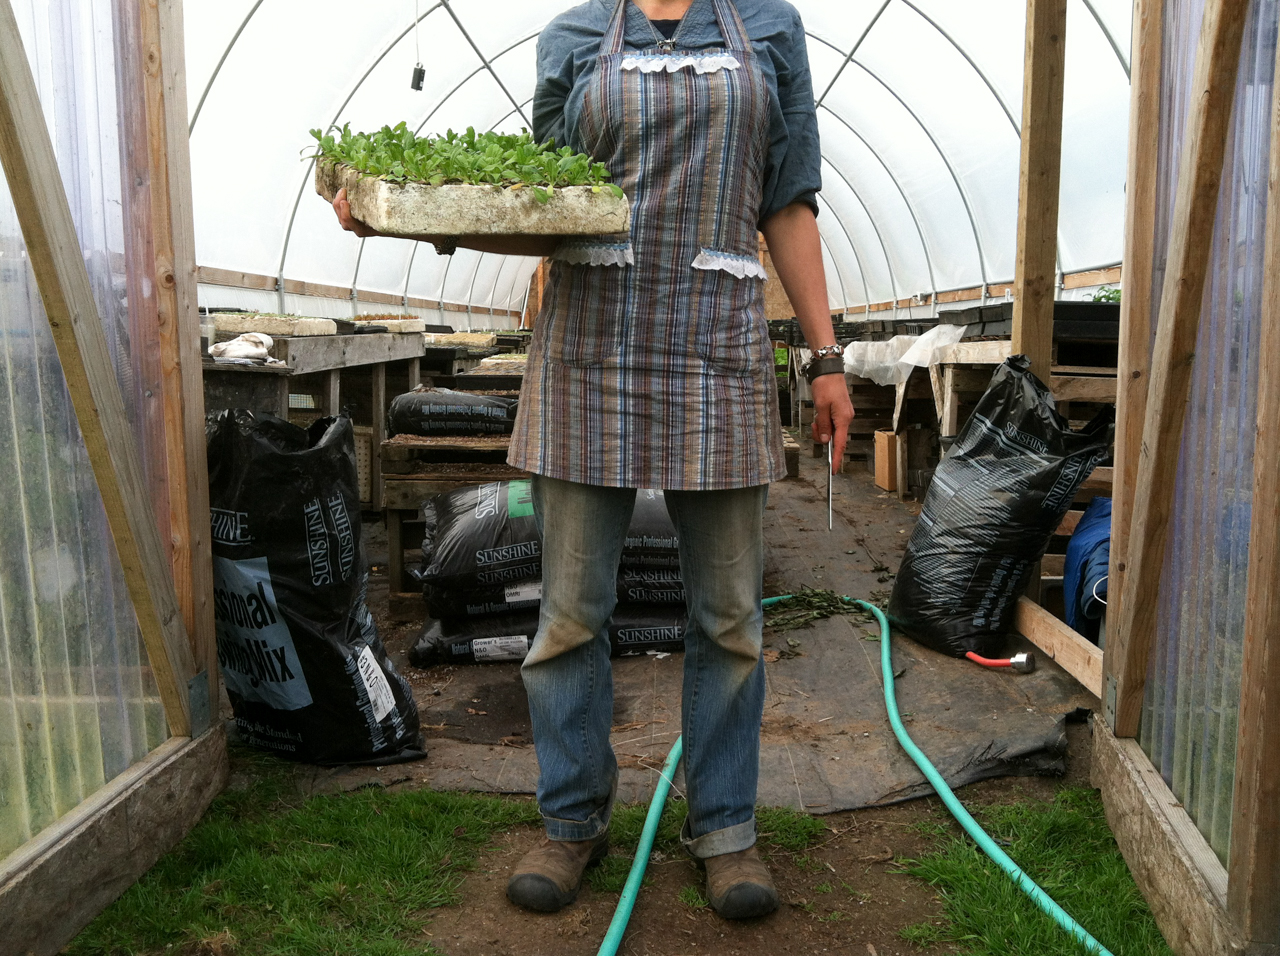 Erin Benzakein holding a tray of seedling outside the greenhouse